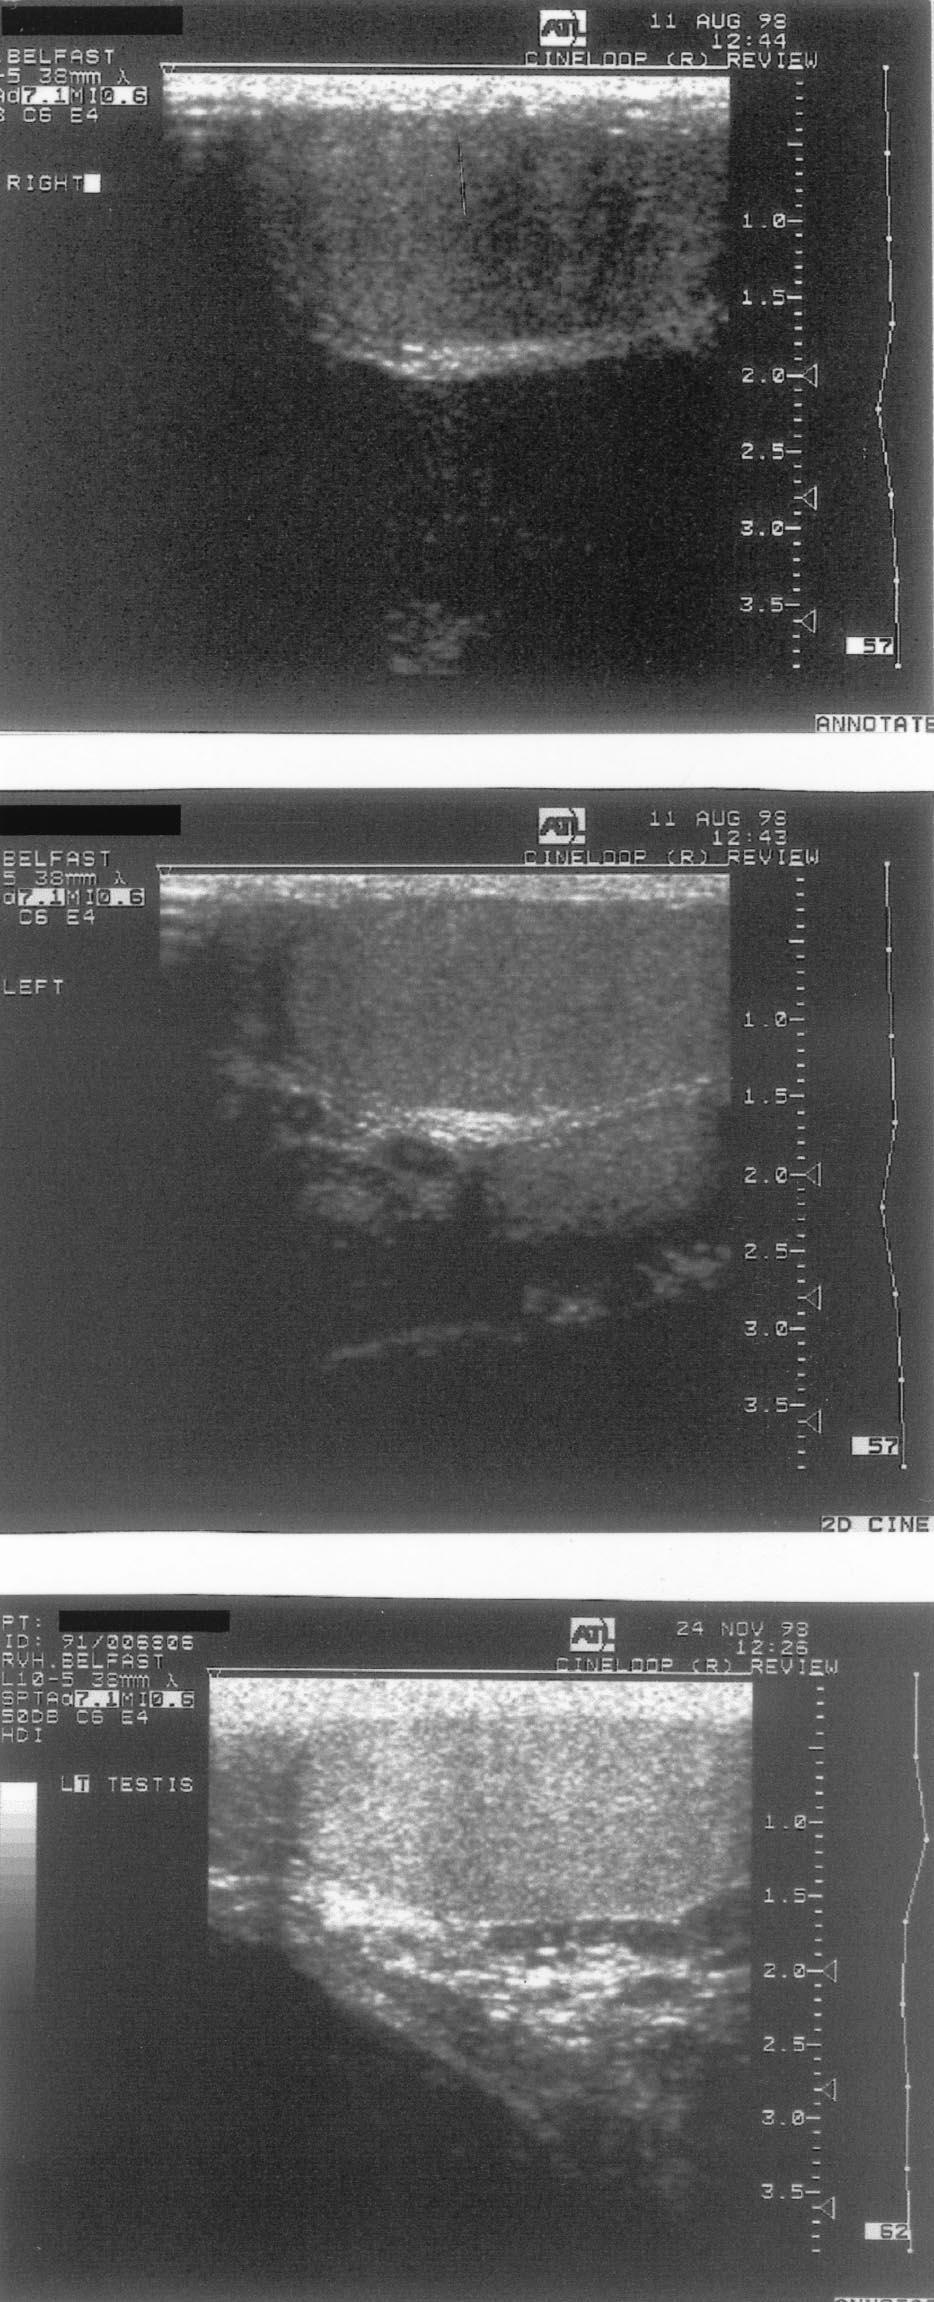 FIGURE 2 Ultrasound appearances of both testes before biopsy and of the left testis after biopsy in a patient with nonobstructive azoospermia.